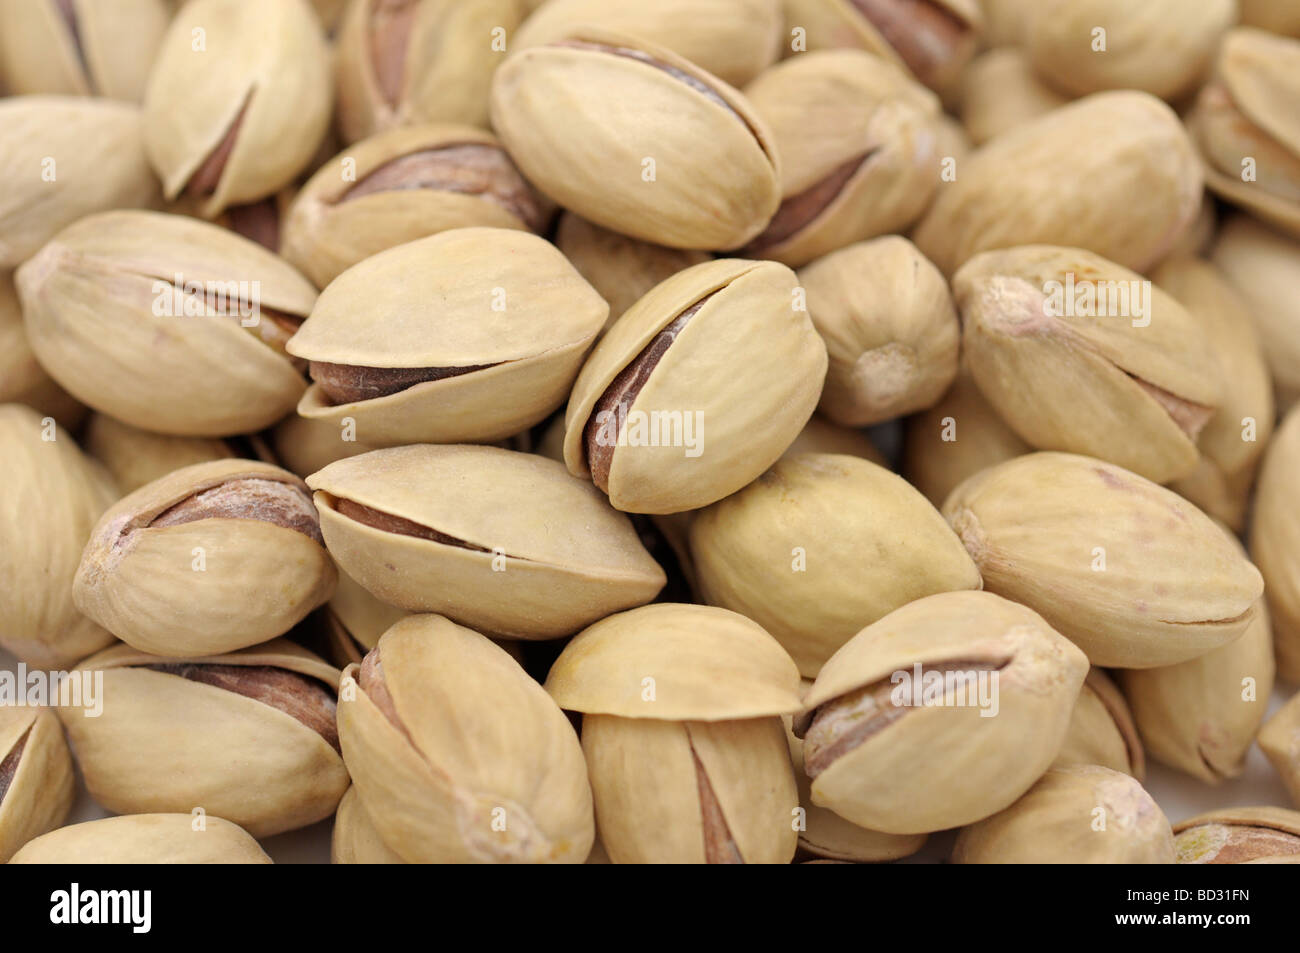 Close-up of Pistachio Nuts Stock Photo